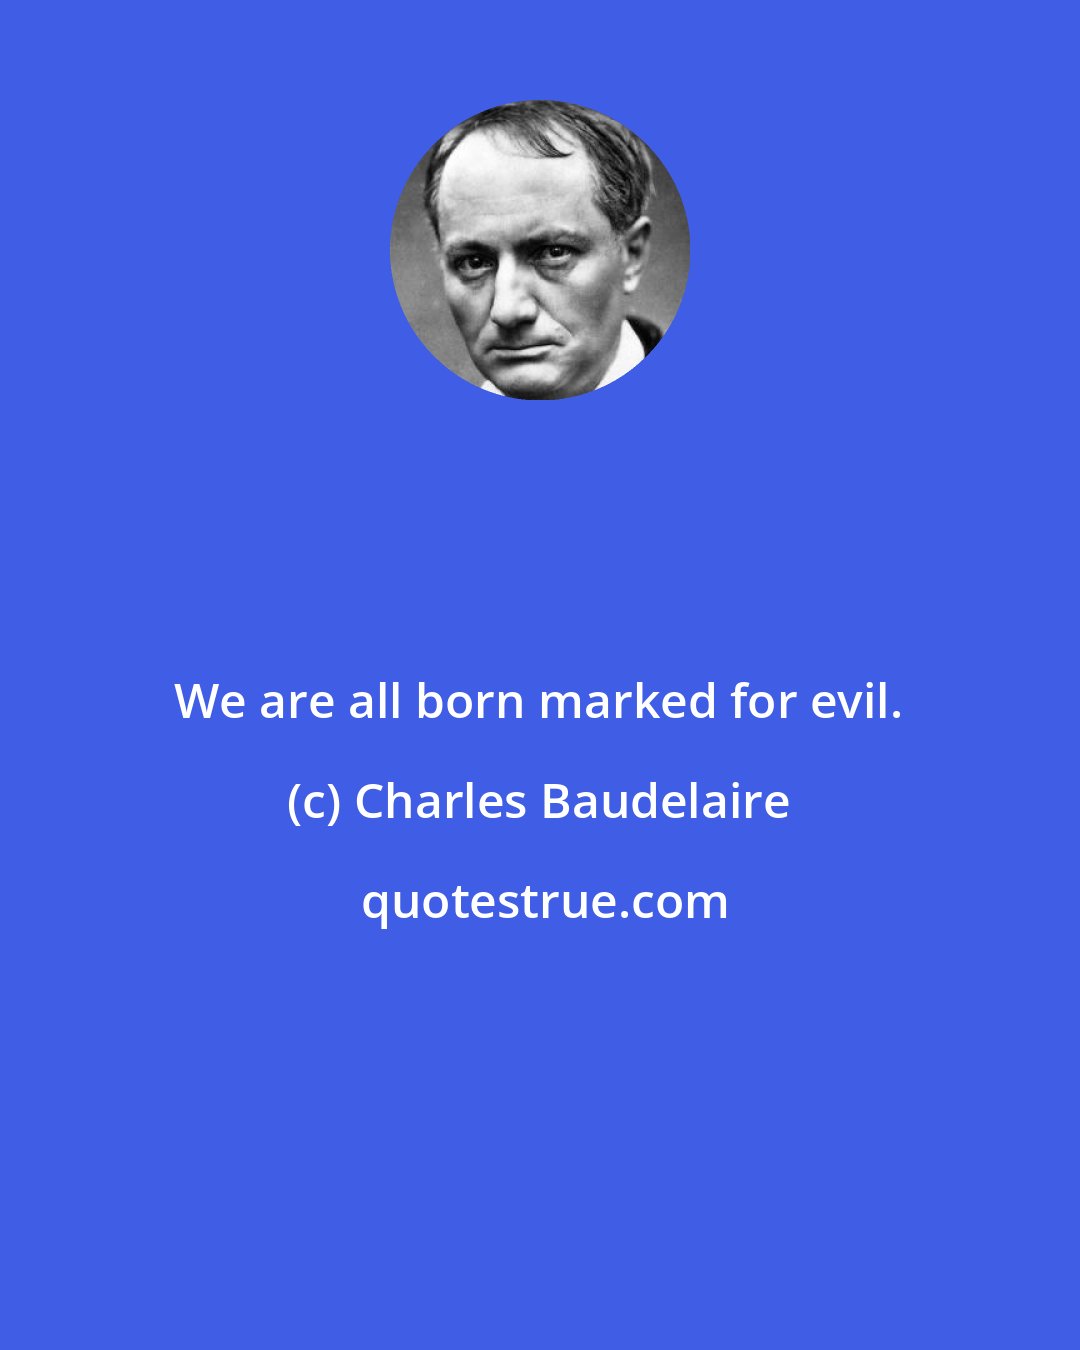 Charles Baudelaire: We are all born marked for evil.